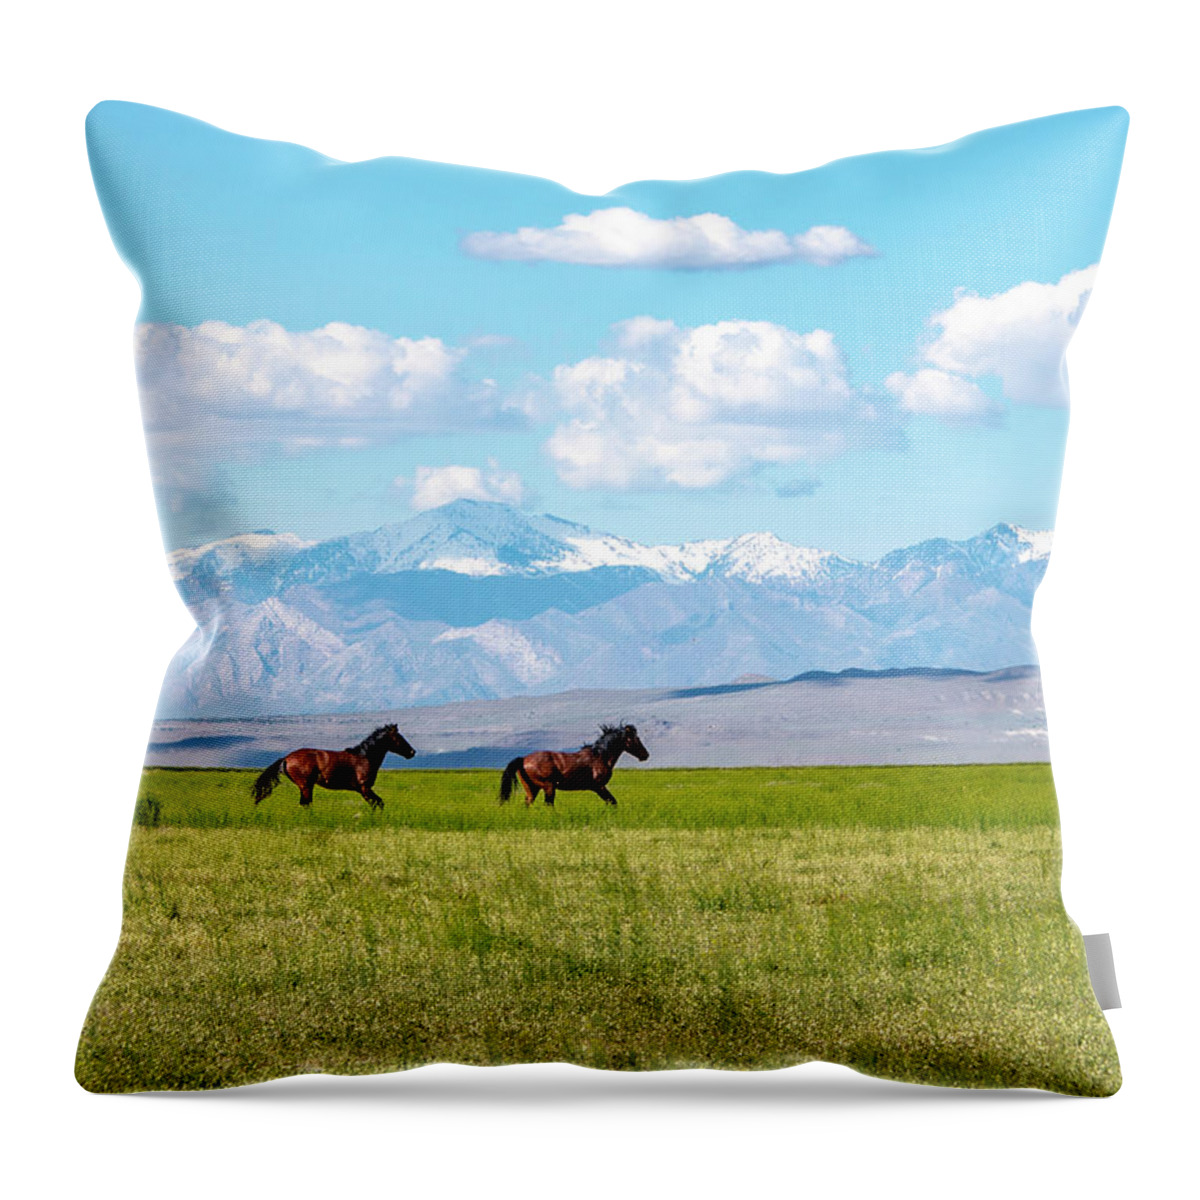  Throw Pillow featuring the photograph Face Mask Running in Grass by Dirk Johnson